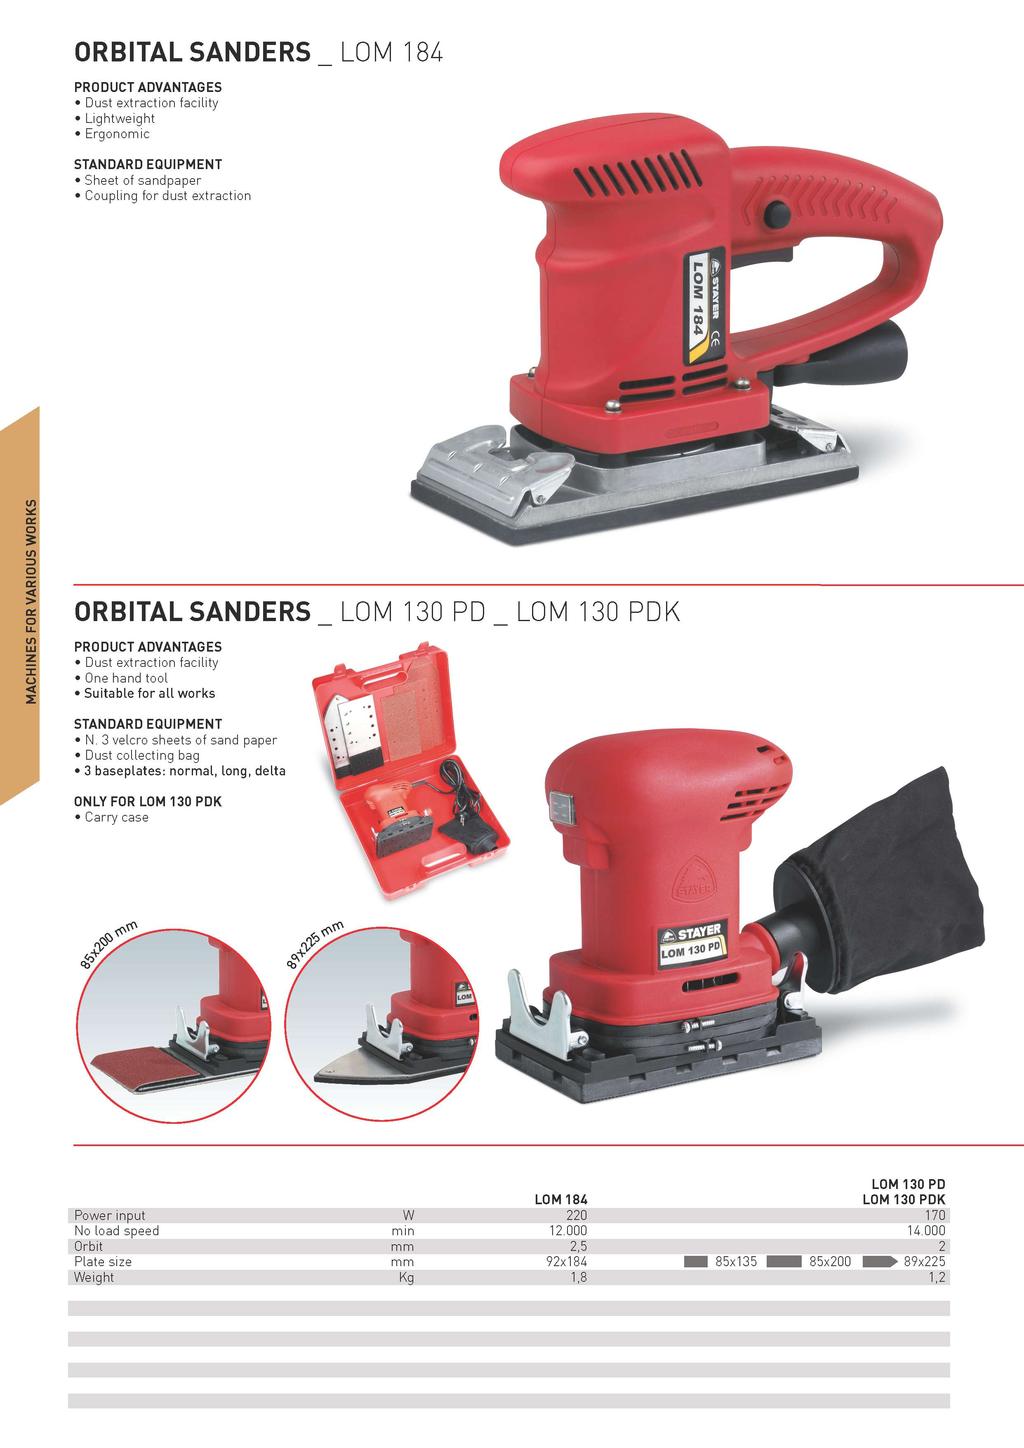 ORBITAL SANDERS _ LOM 184 Dust extraction facility Lightweight Ergonomic Sheet of sandpaper Coupling for dust extraction Power input No